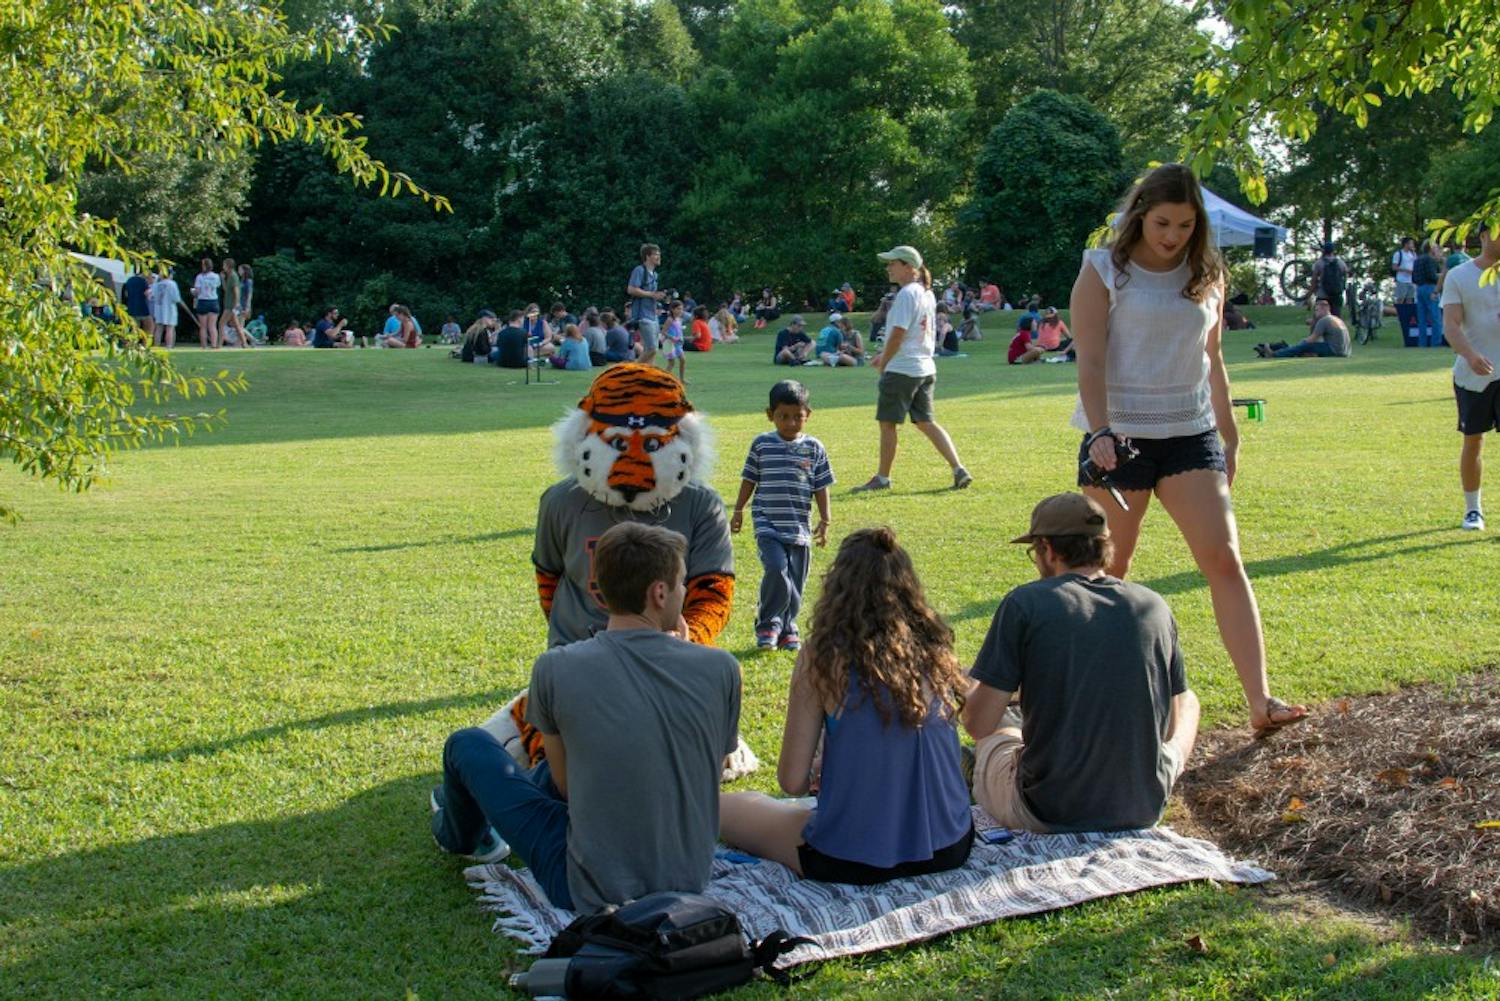 Members of the public spend some time with Aubie during the Sustainability Picnic at Donald E. Davis Arboretum, on Wednesday, Aug. 22, 2018, in Auburn, Ala.